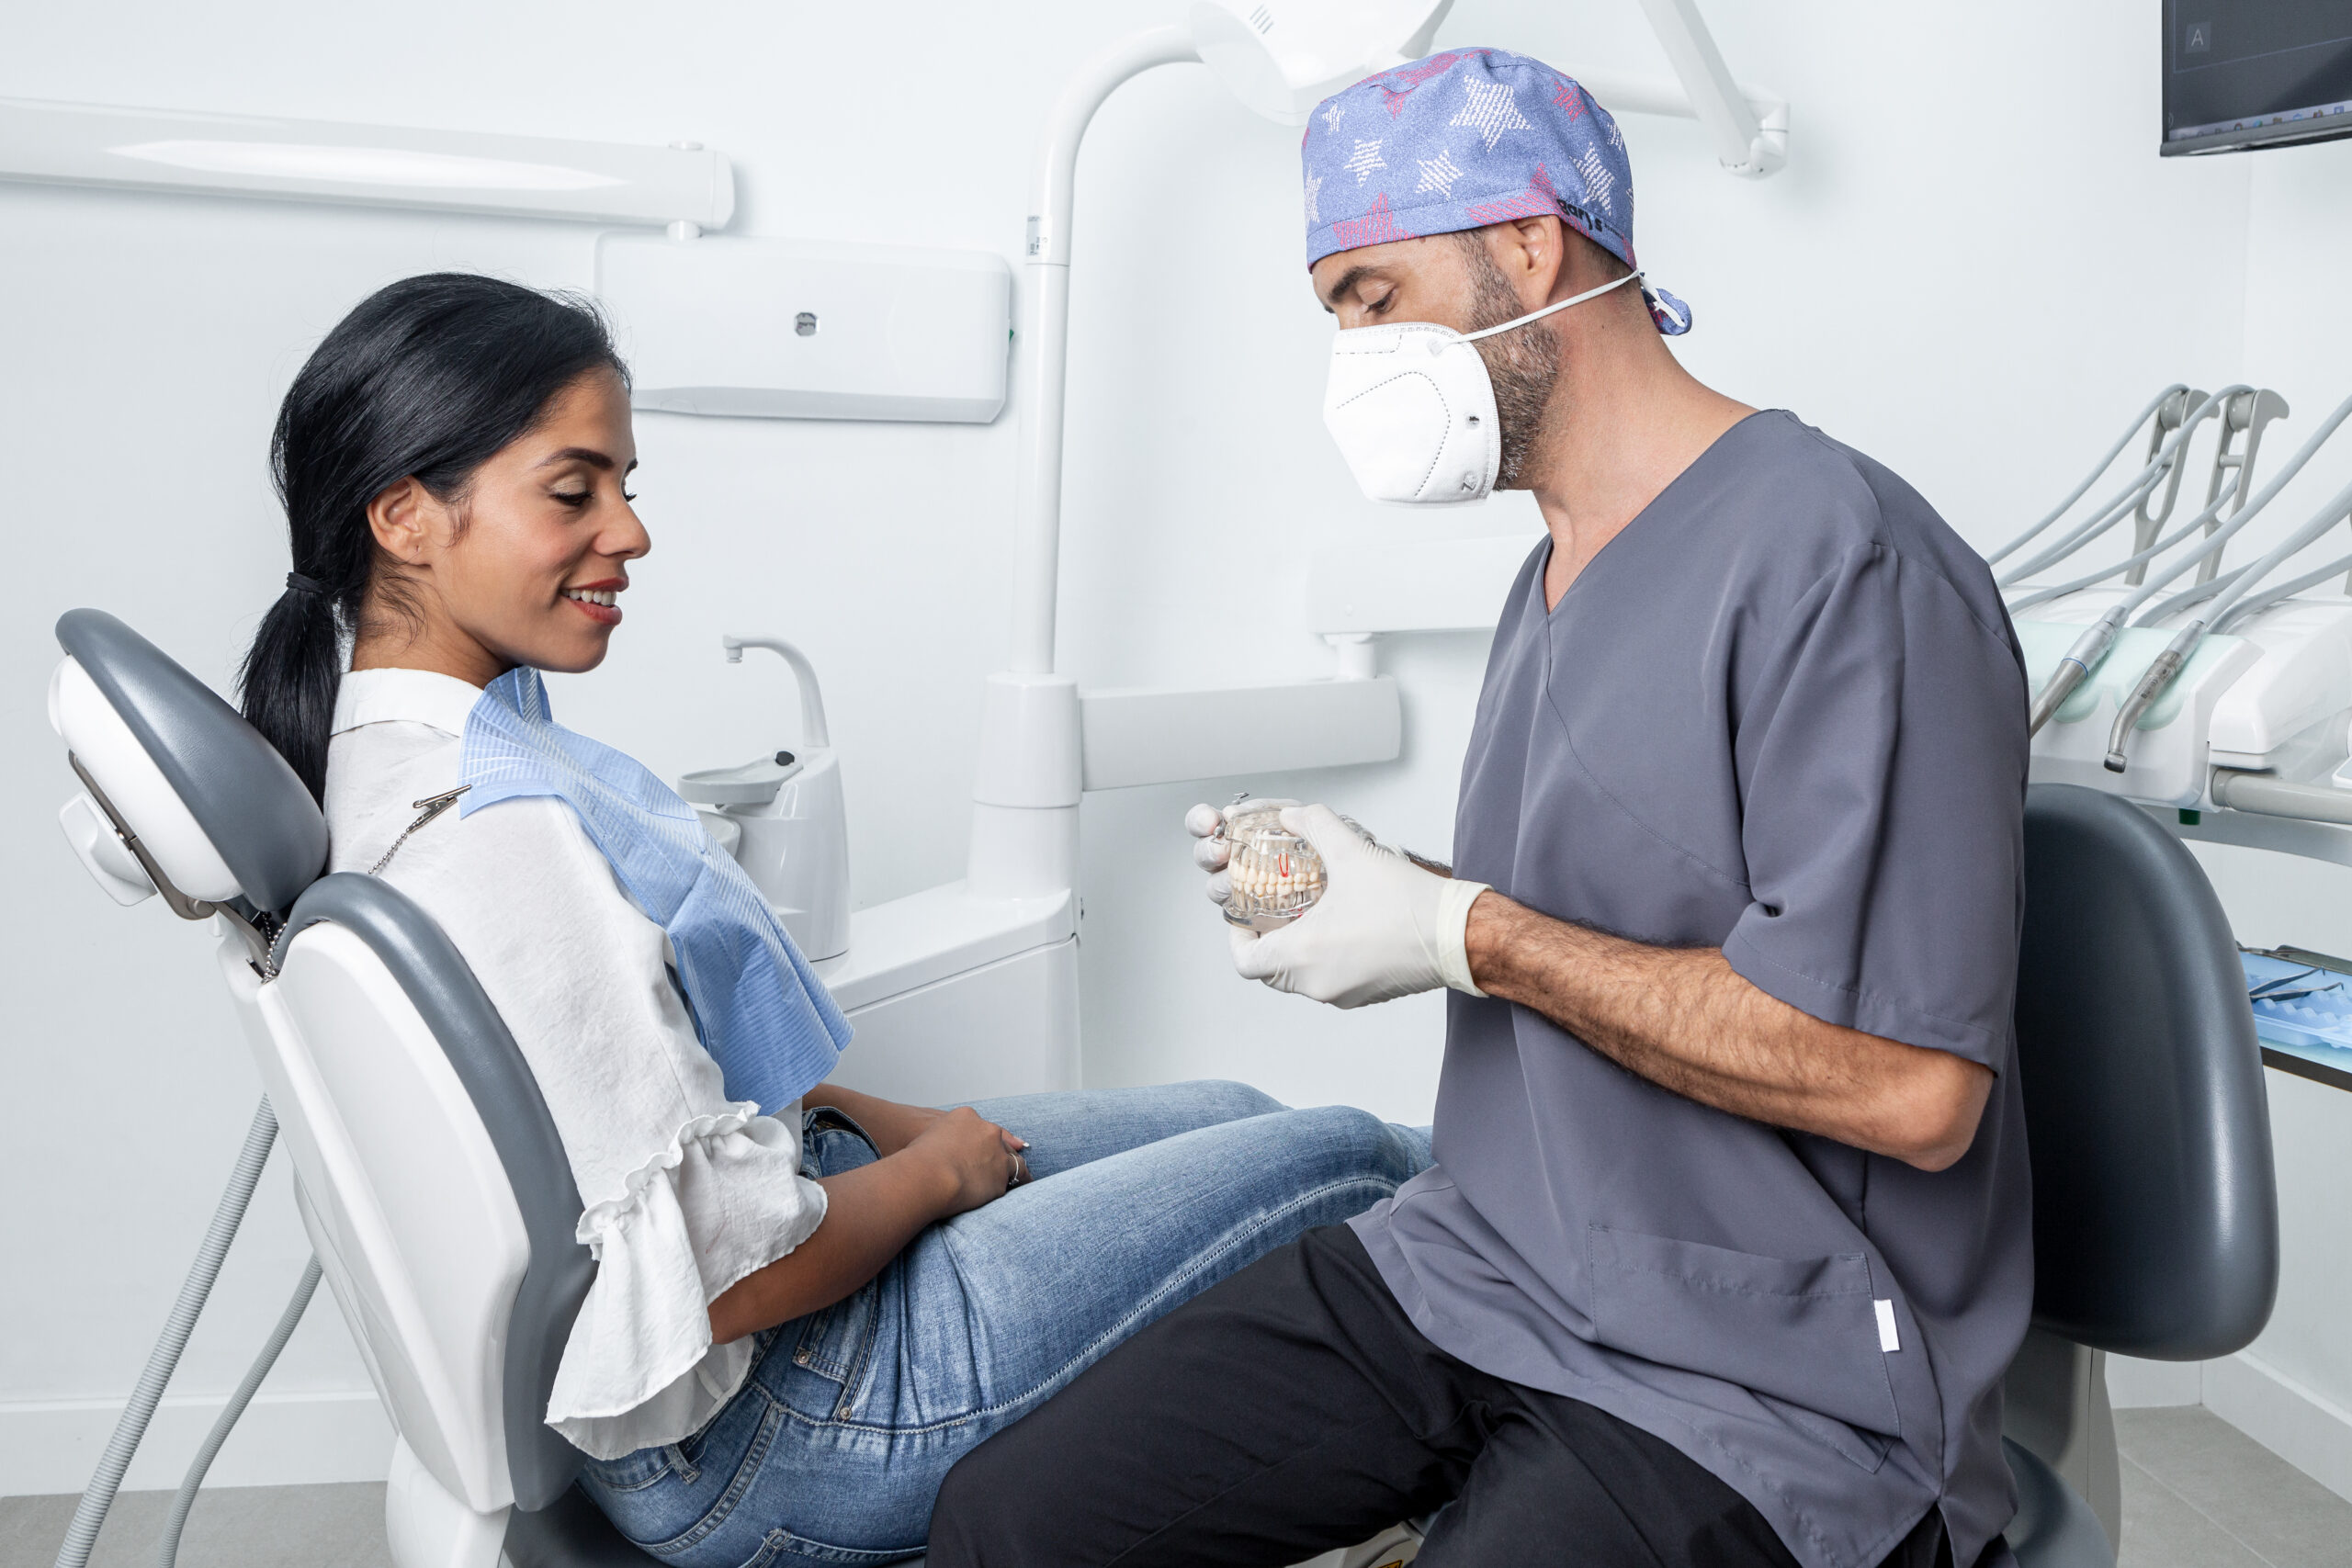 dentist showing a dental mould to a patient sitting in a dental clinic.